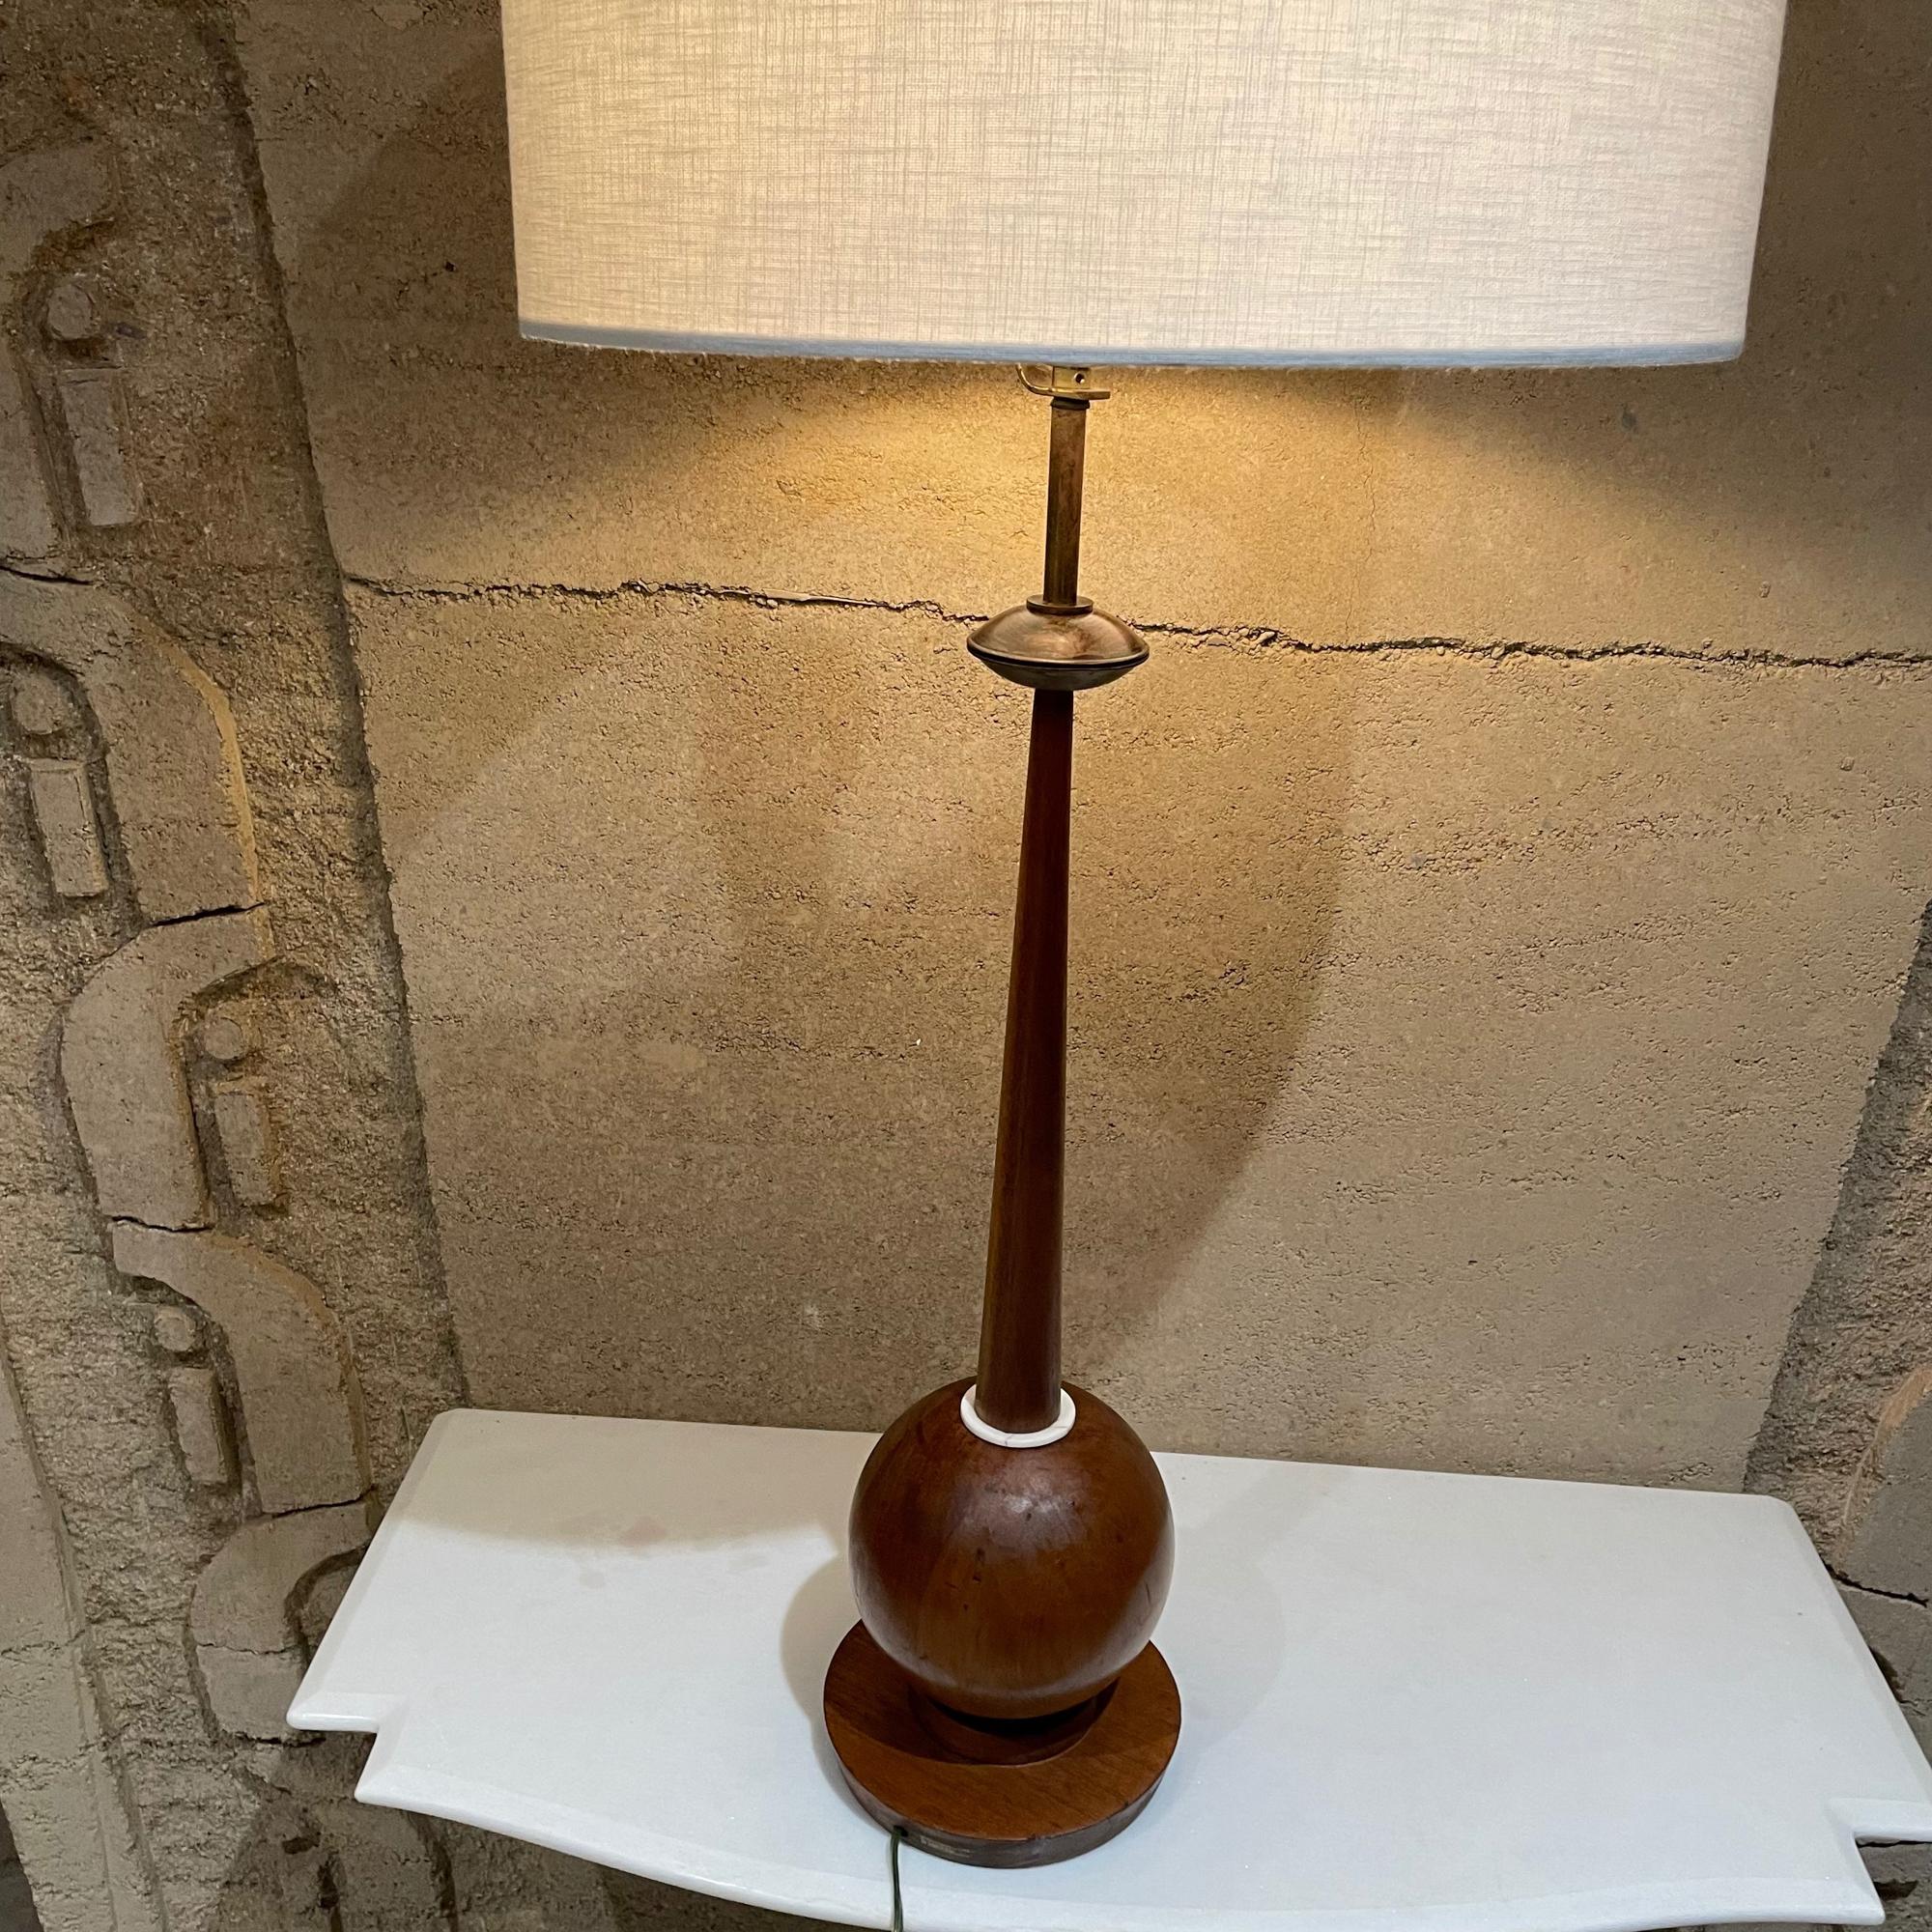 Modernism Mexican Mahogany Sculptural Wood Sphere Table Lamp
precise clean lines 1960s by Angelita.
Maker tag present.
In the style of Tony Paul for Westwood Industries.
35.5 tall x 6.75 diameter x 27 tall to the socket inches
Original Unrestored